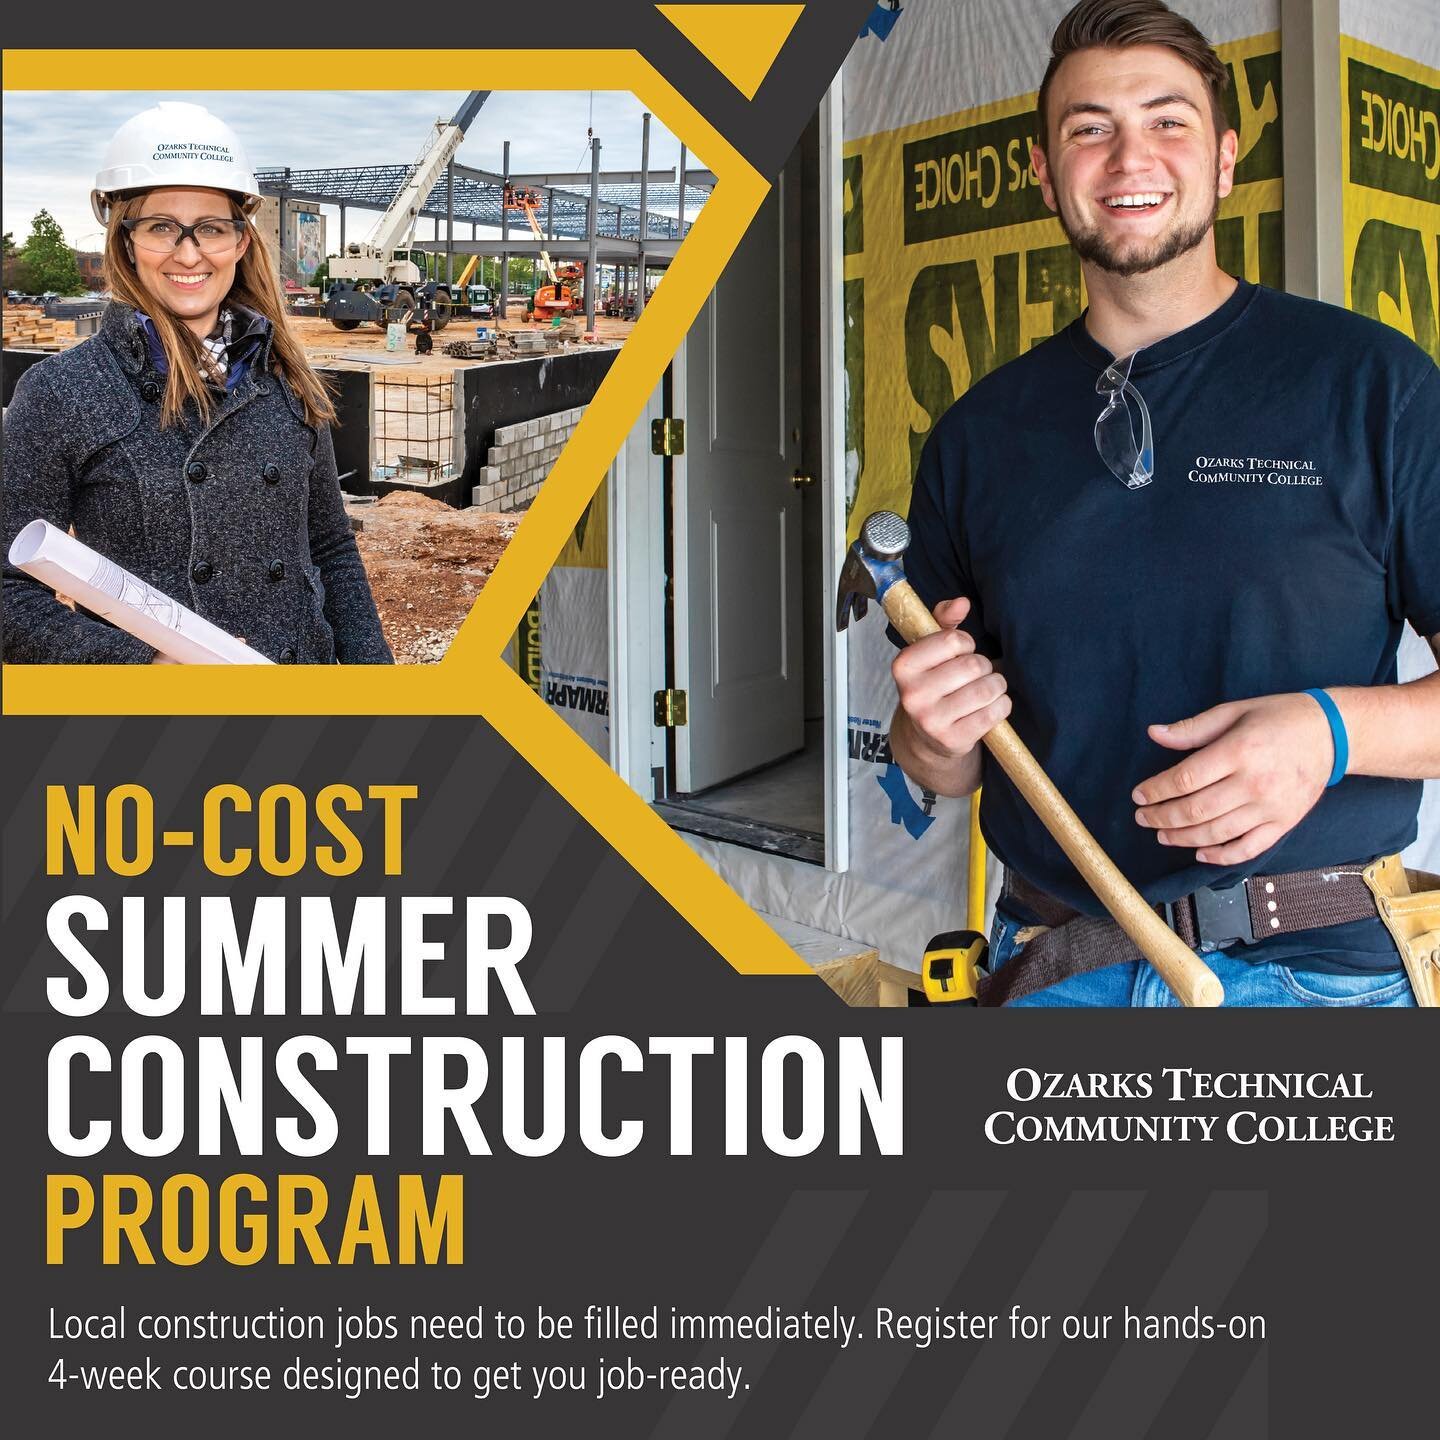 There are tons of construction jobs available - this quick 4-week course being offered for free is an excellent stepping stone into a construction career!
.
.
.
#constructionjobs #constructionschool #constructioneducation